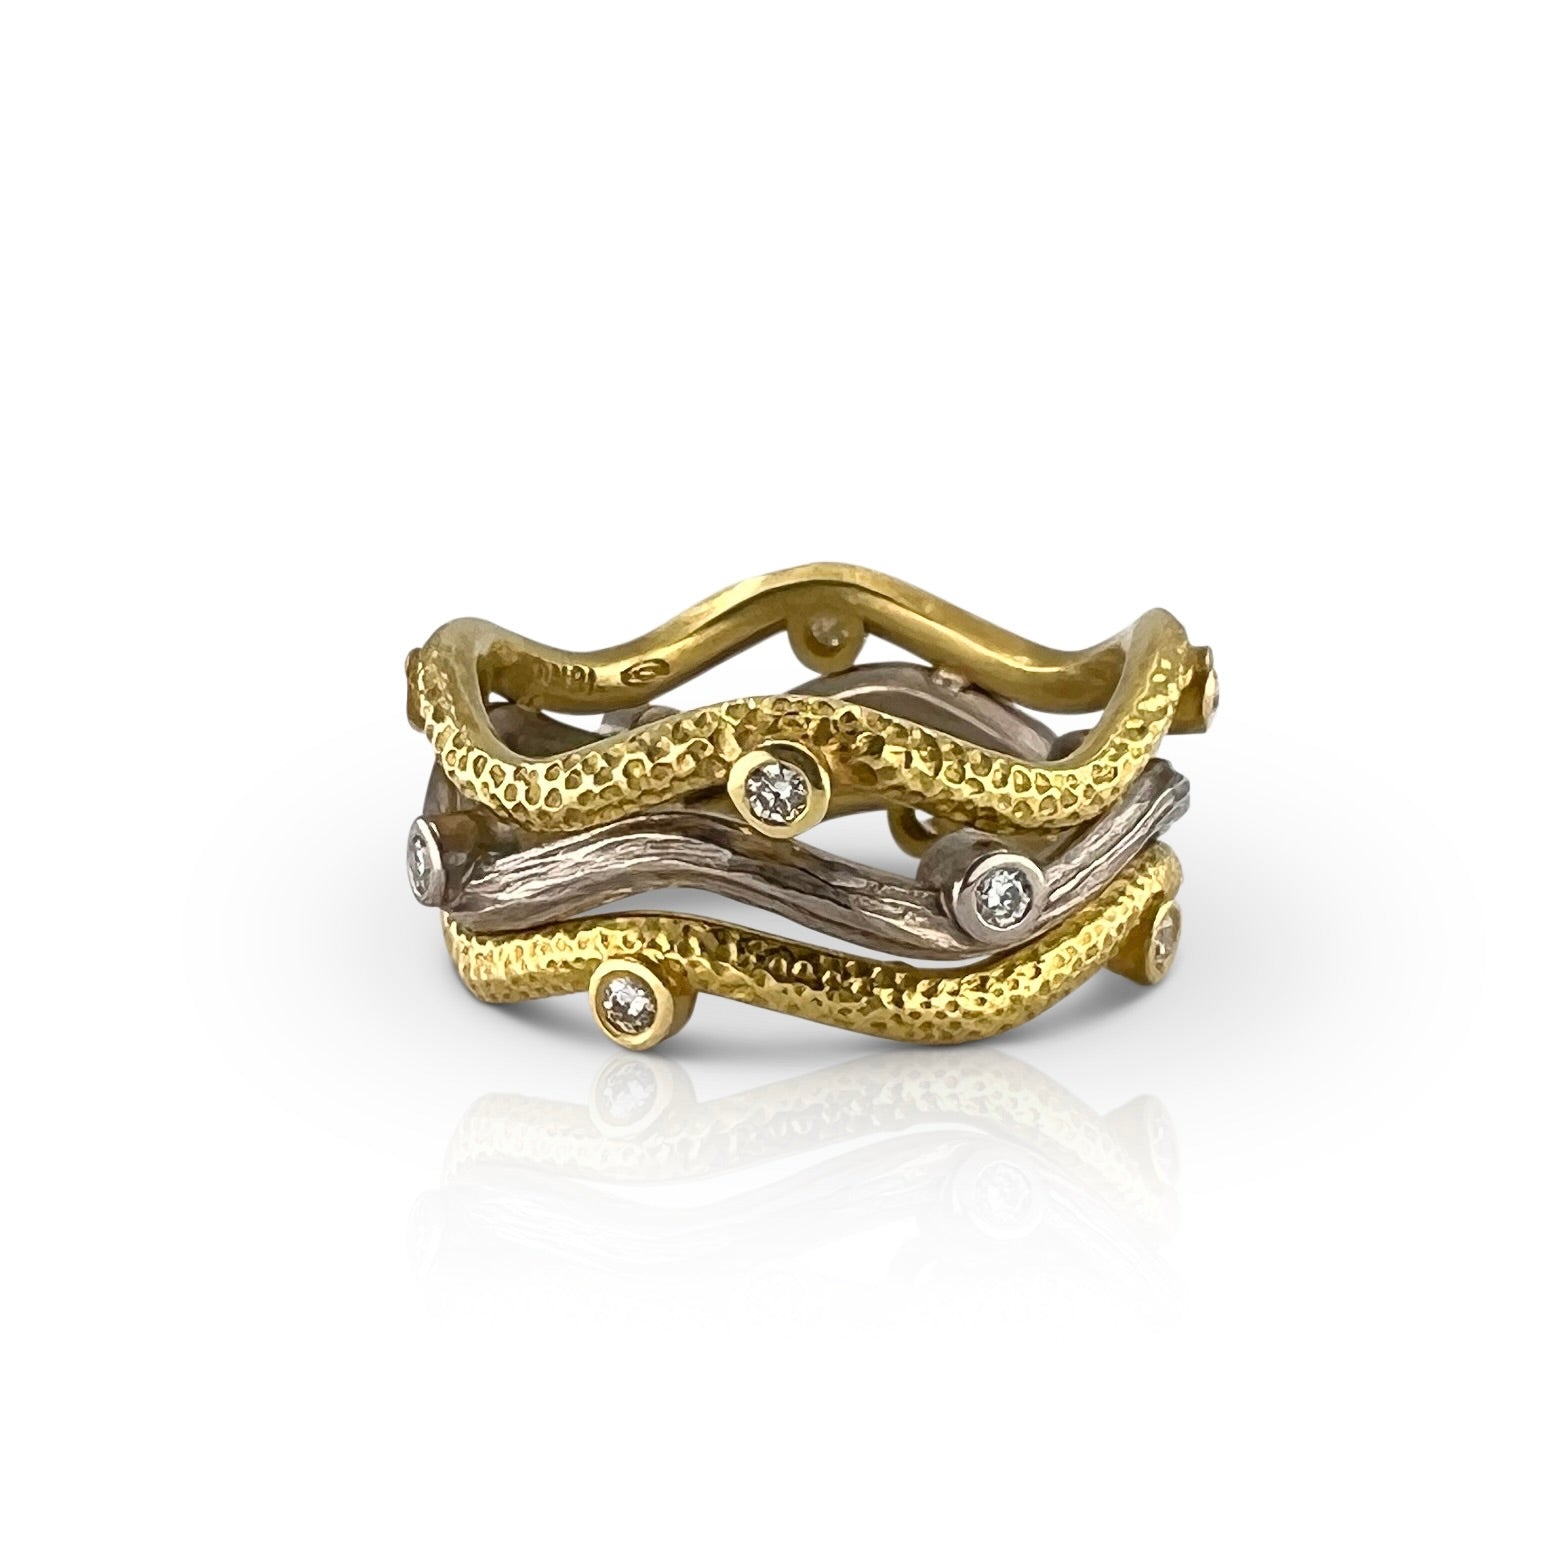 Triple wave Serpentine ring in yellow and white gold with diamonds